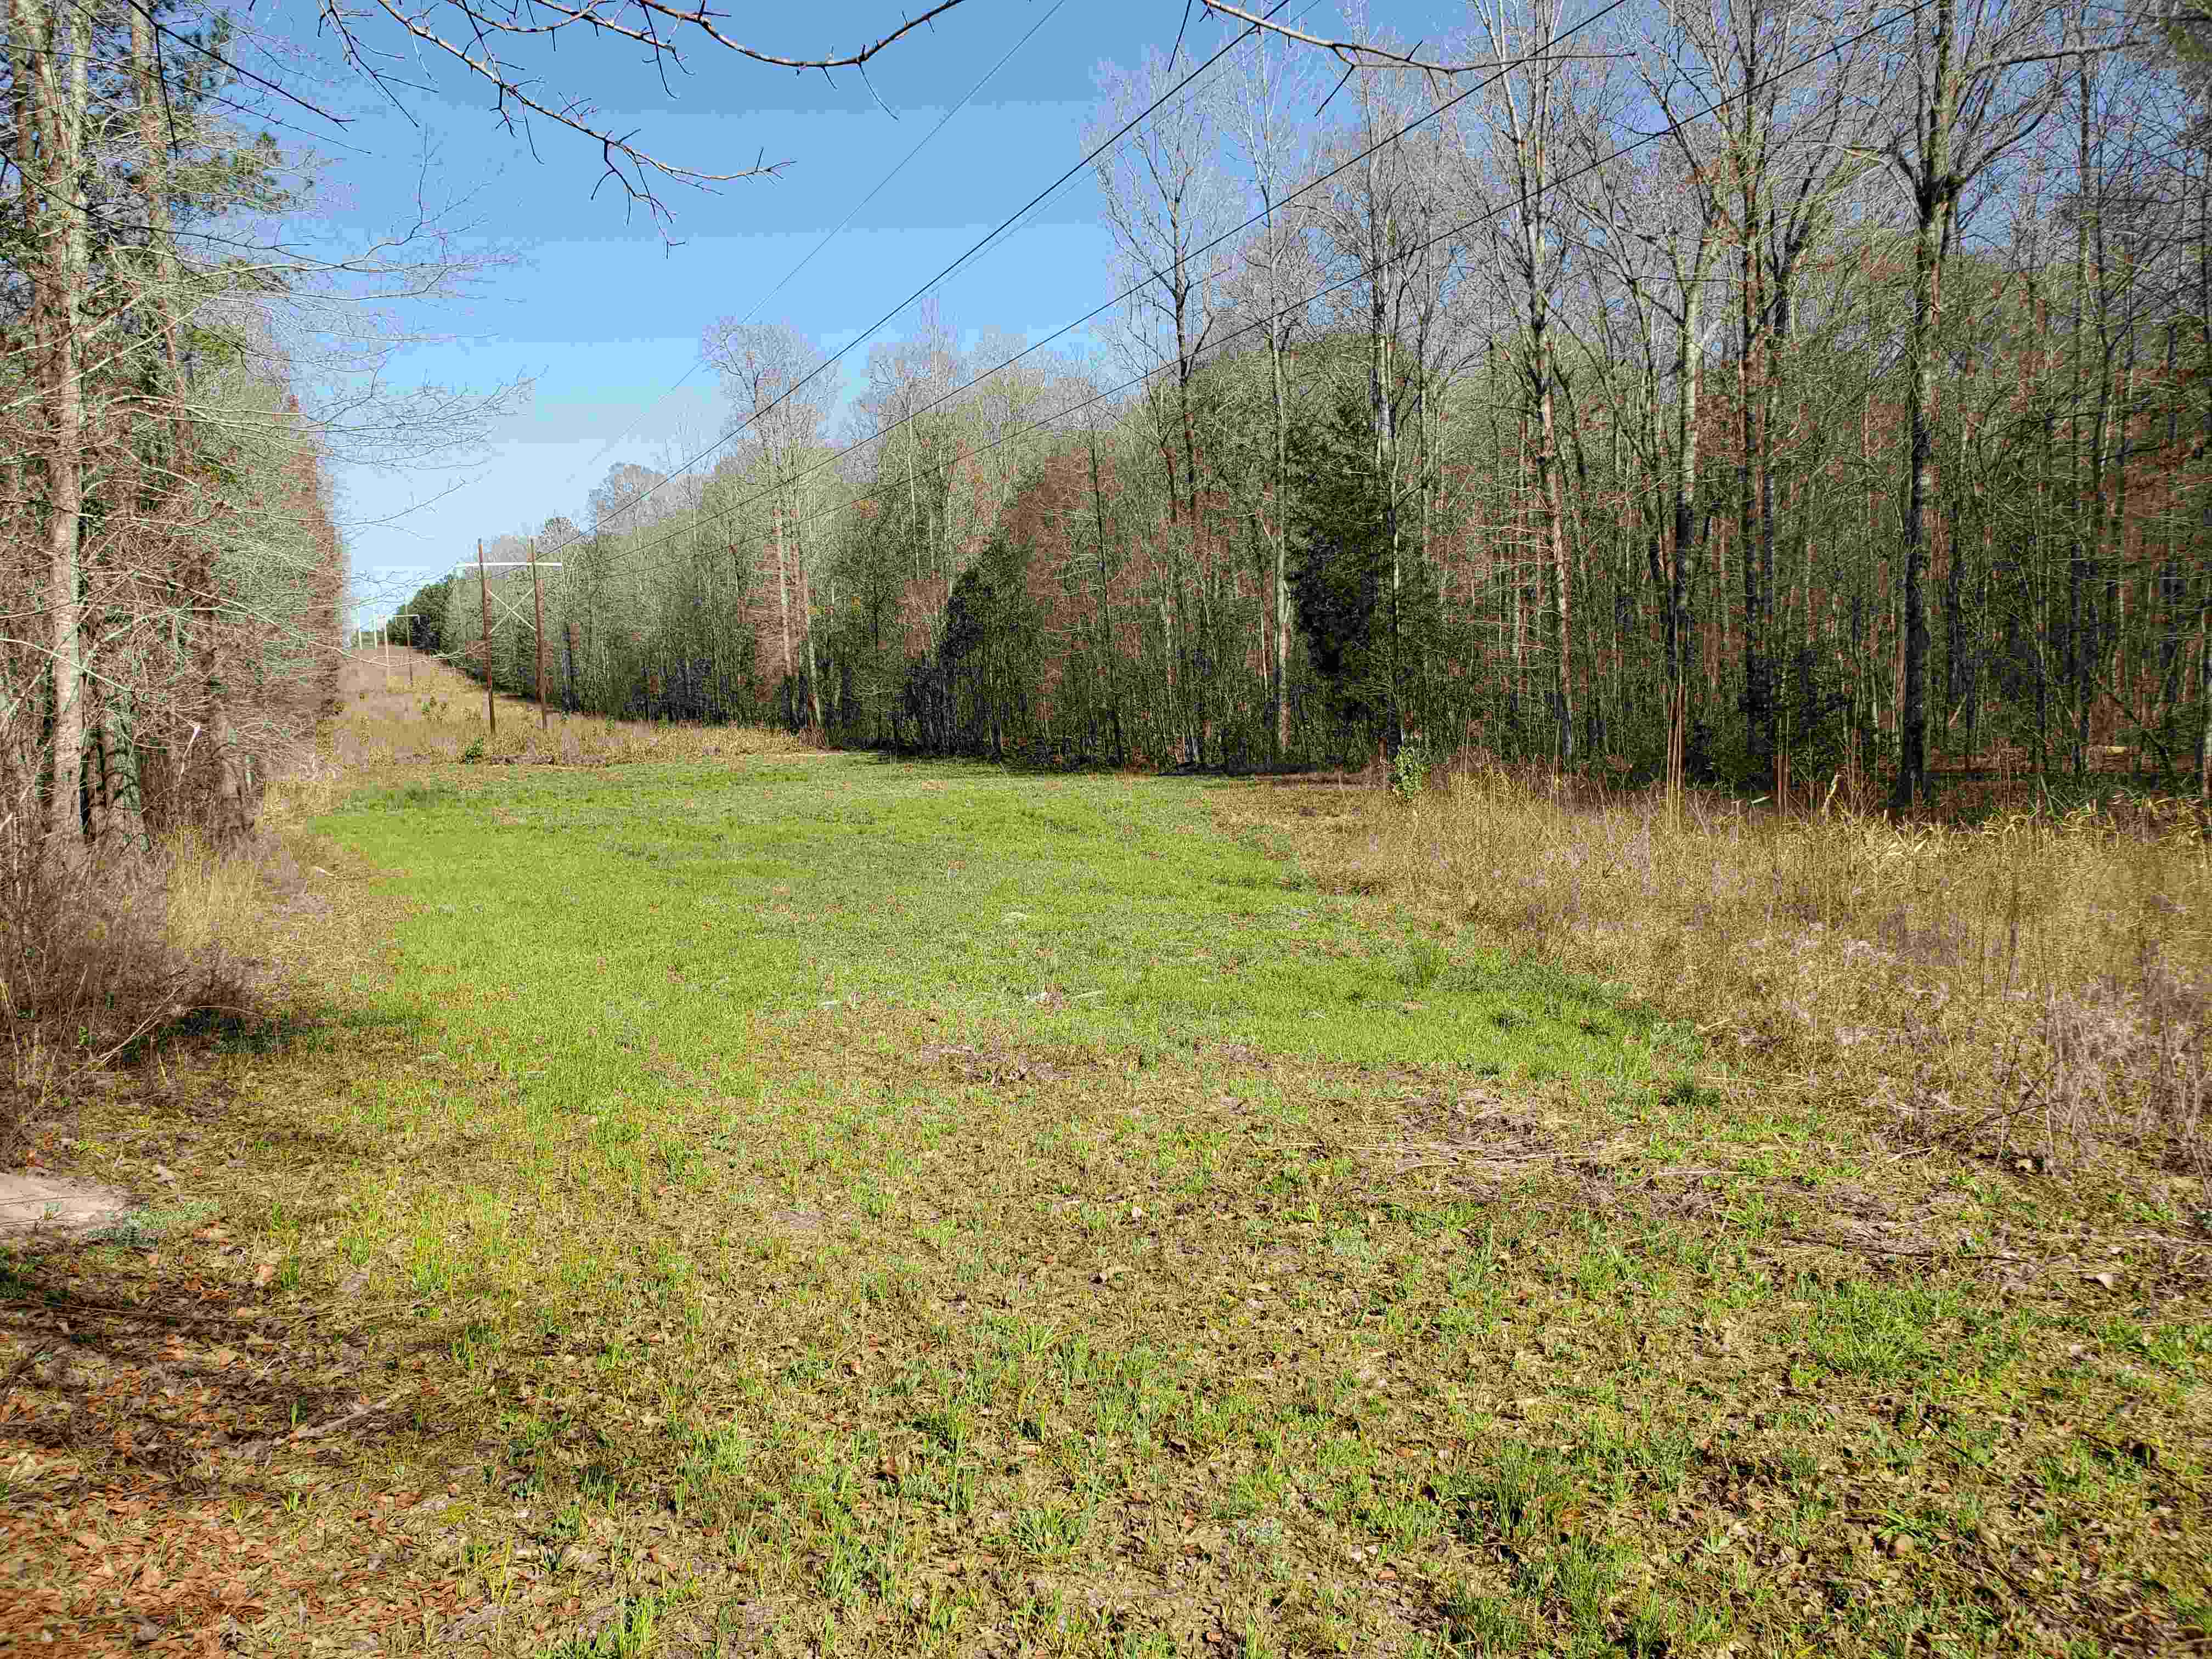 A wildlife food plot under the powerline on the east side of the property